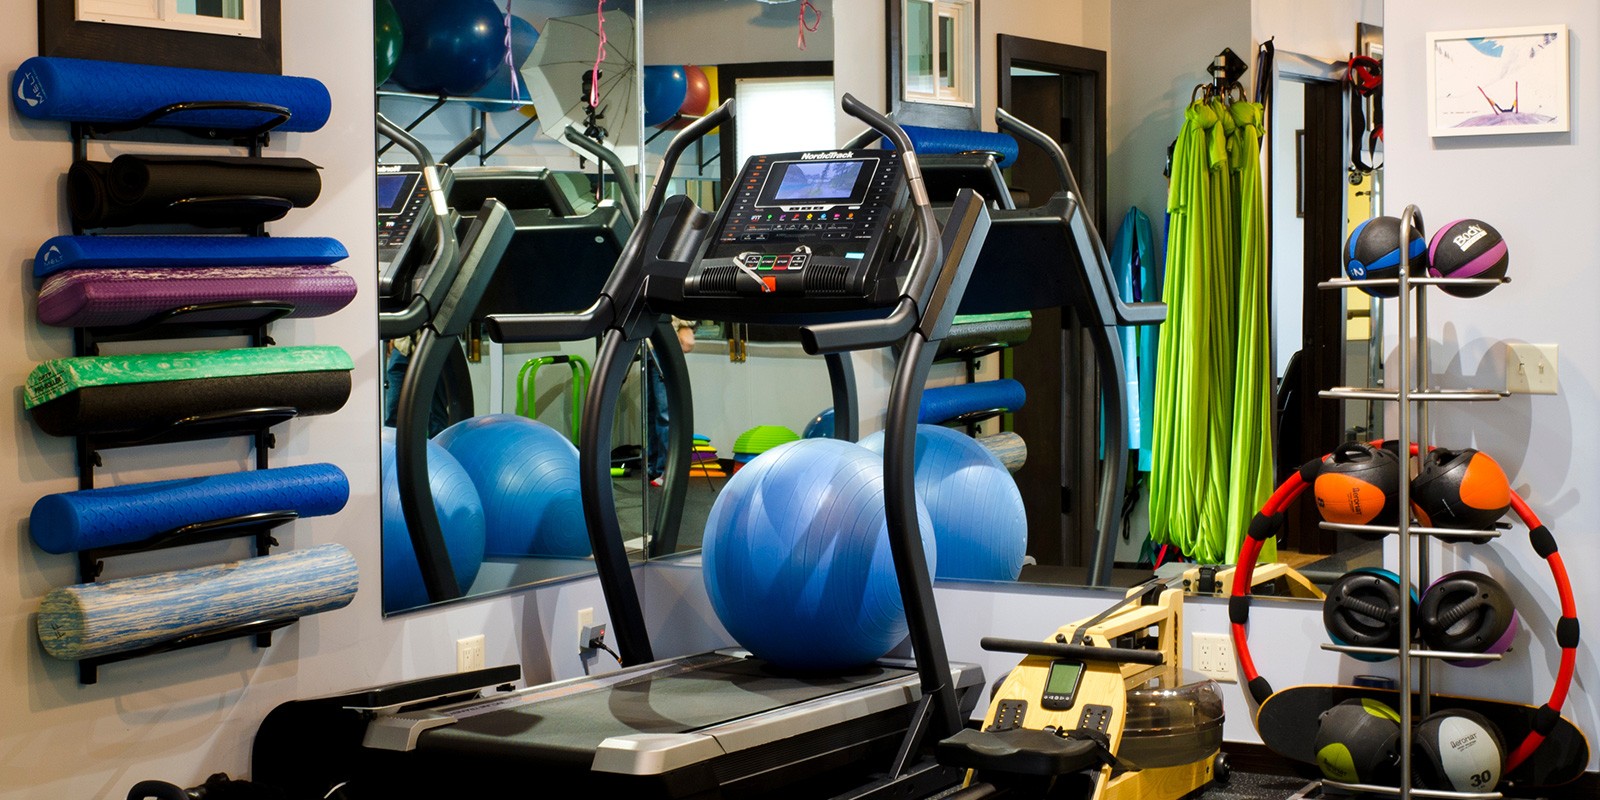 Engage in personal training and wellness programs in our pristine state-of-the-art facility